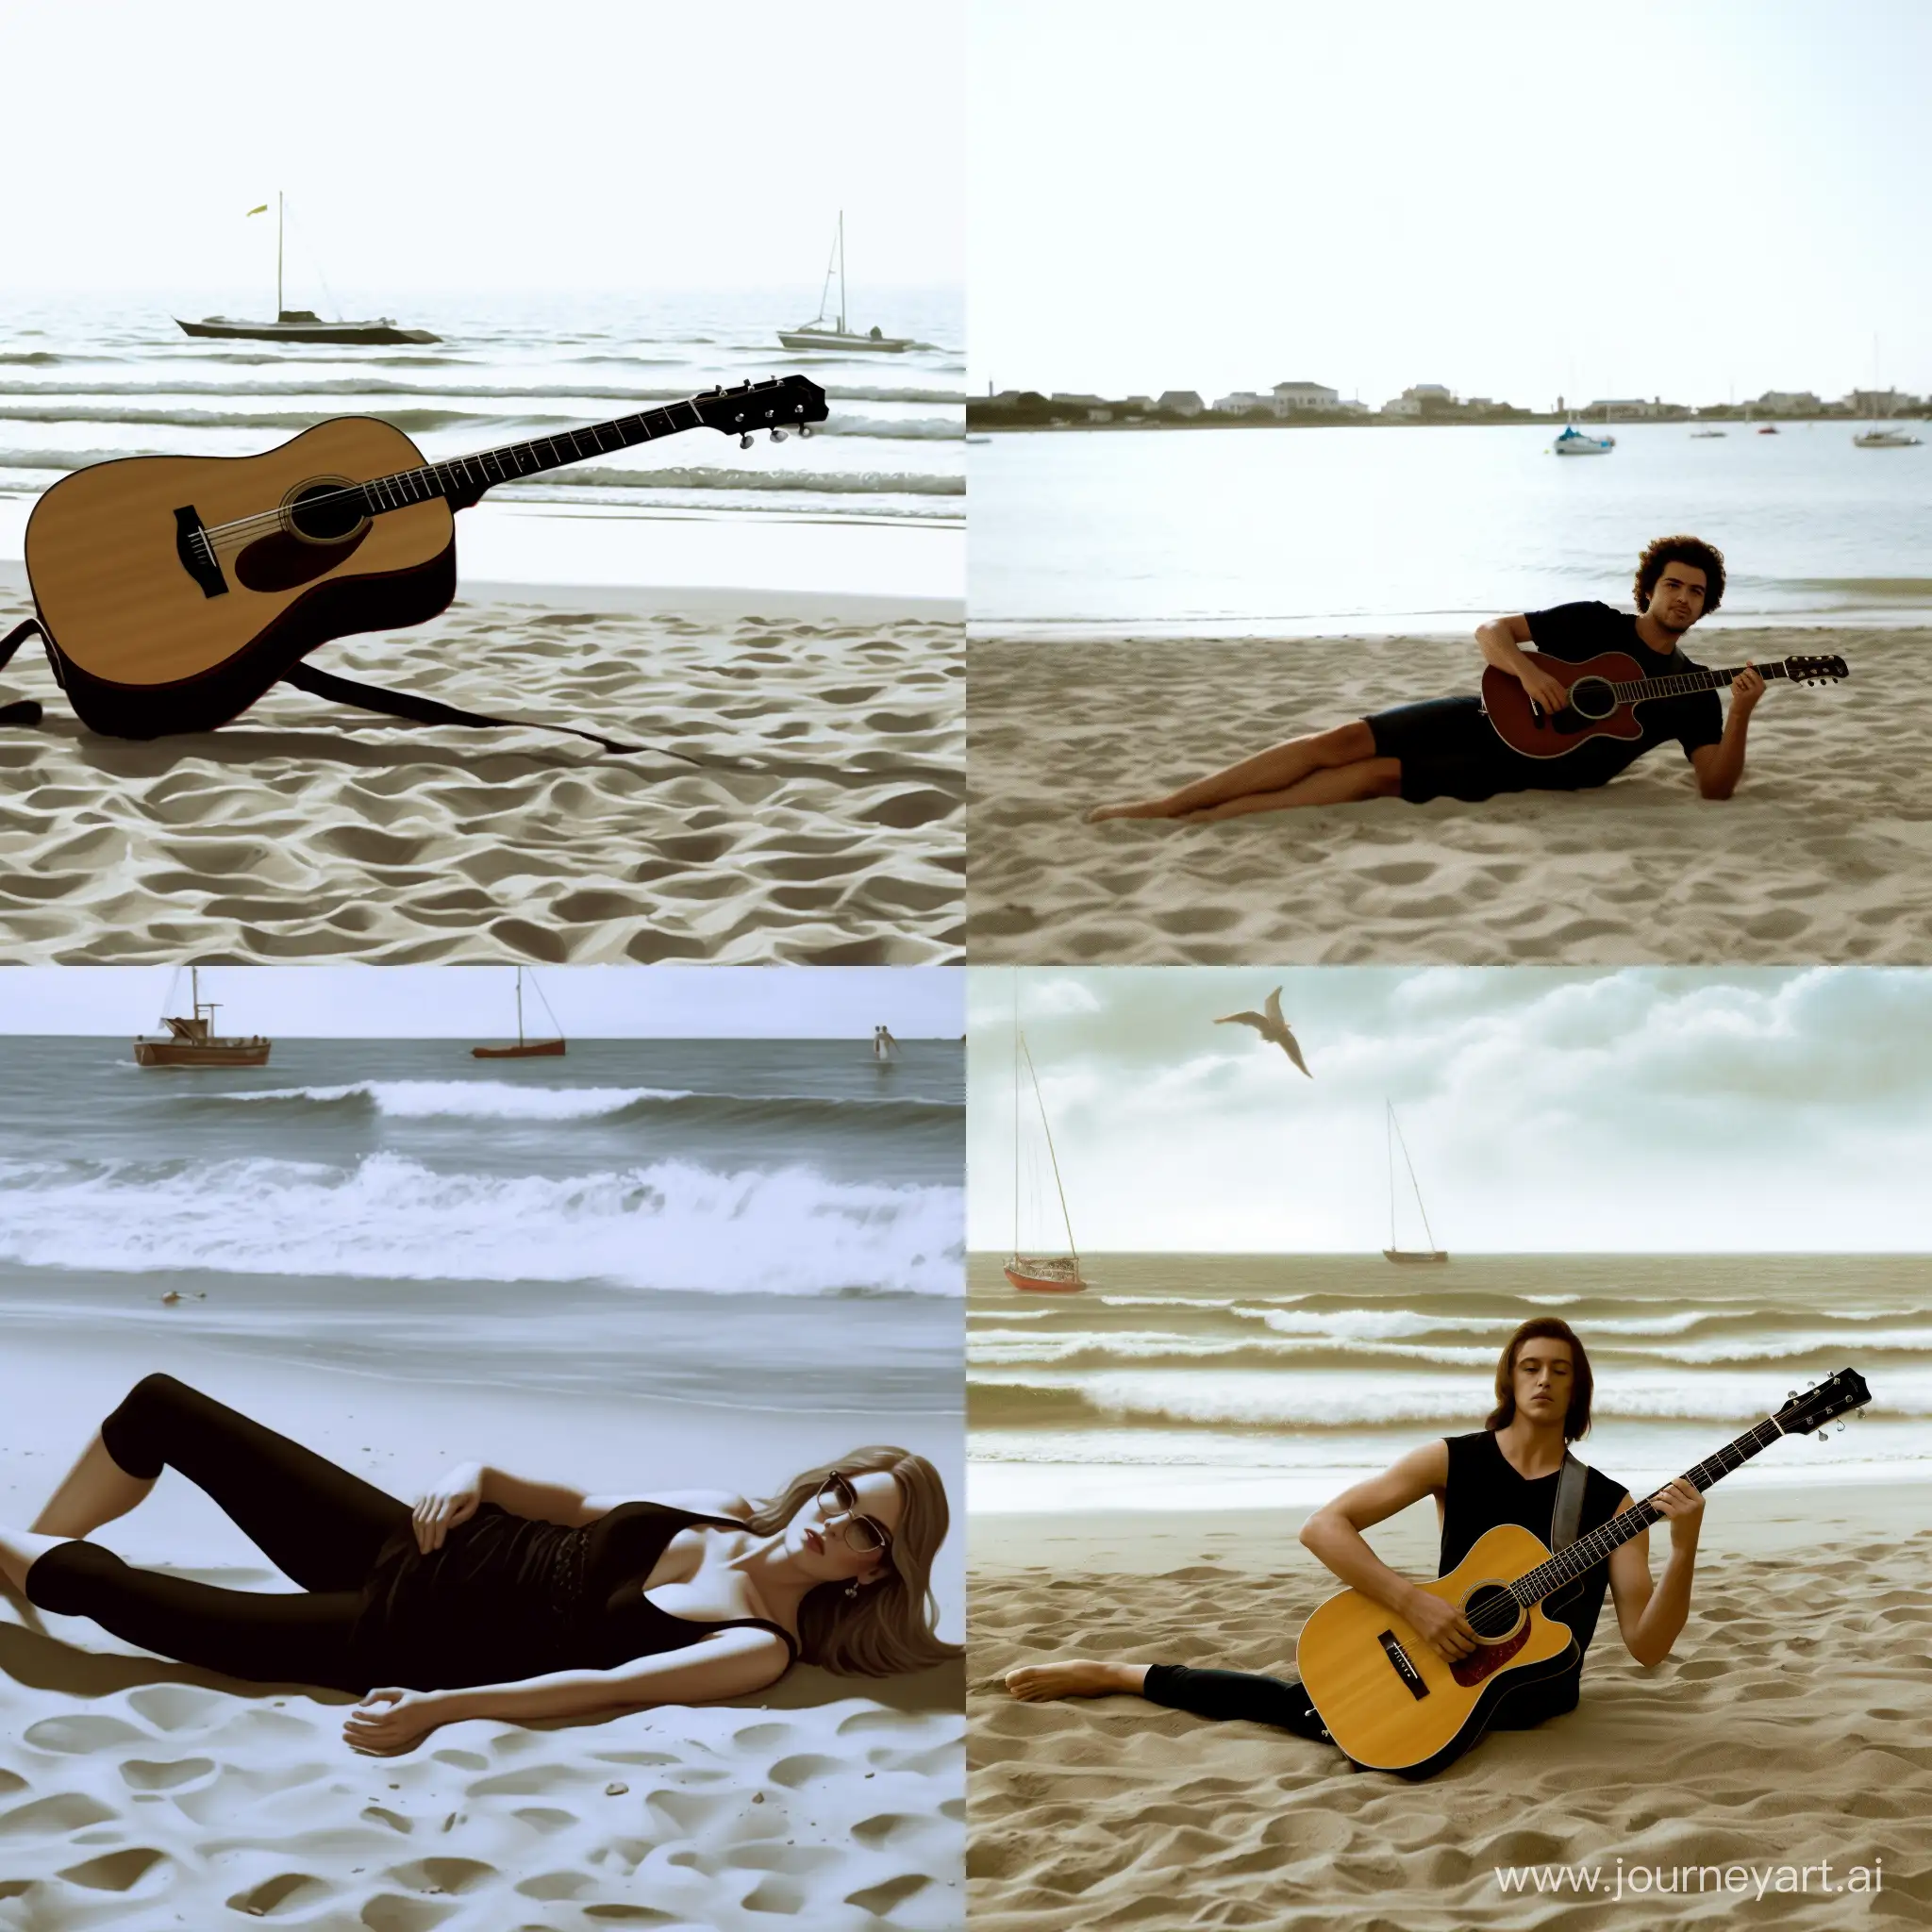 taylor swift at the beach lying on her stomach whil her feet are in the air